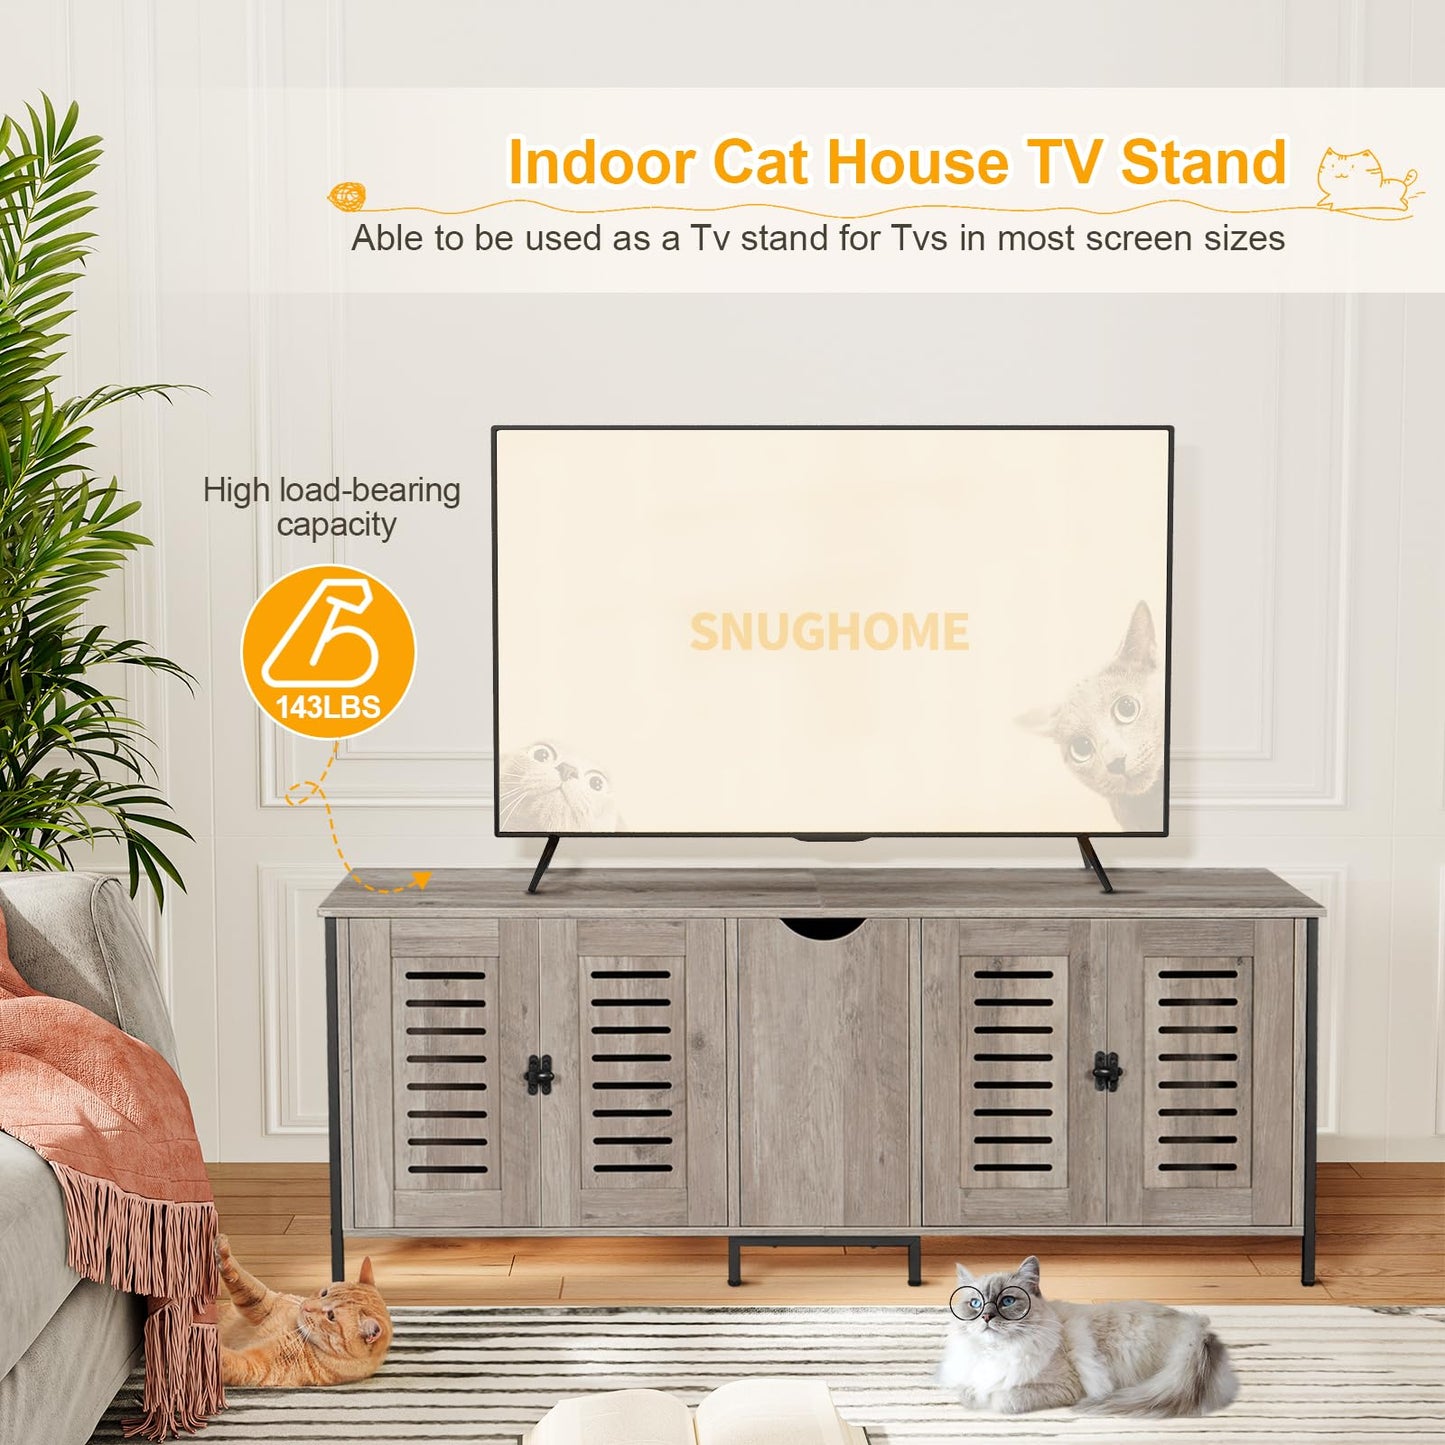 Snughome Cat Litter Box Enclosure for 2 Cats, 51.18’’ Hidden Cat Litter Box Furniture with Double Room, Large Wooden Cat Washroom with Storage Cabinet, Indoor Cat House TV Stand Side Table, Grey